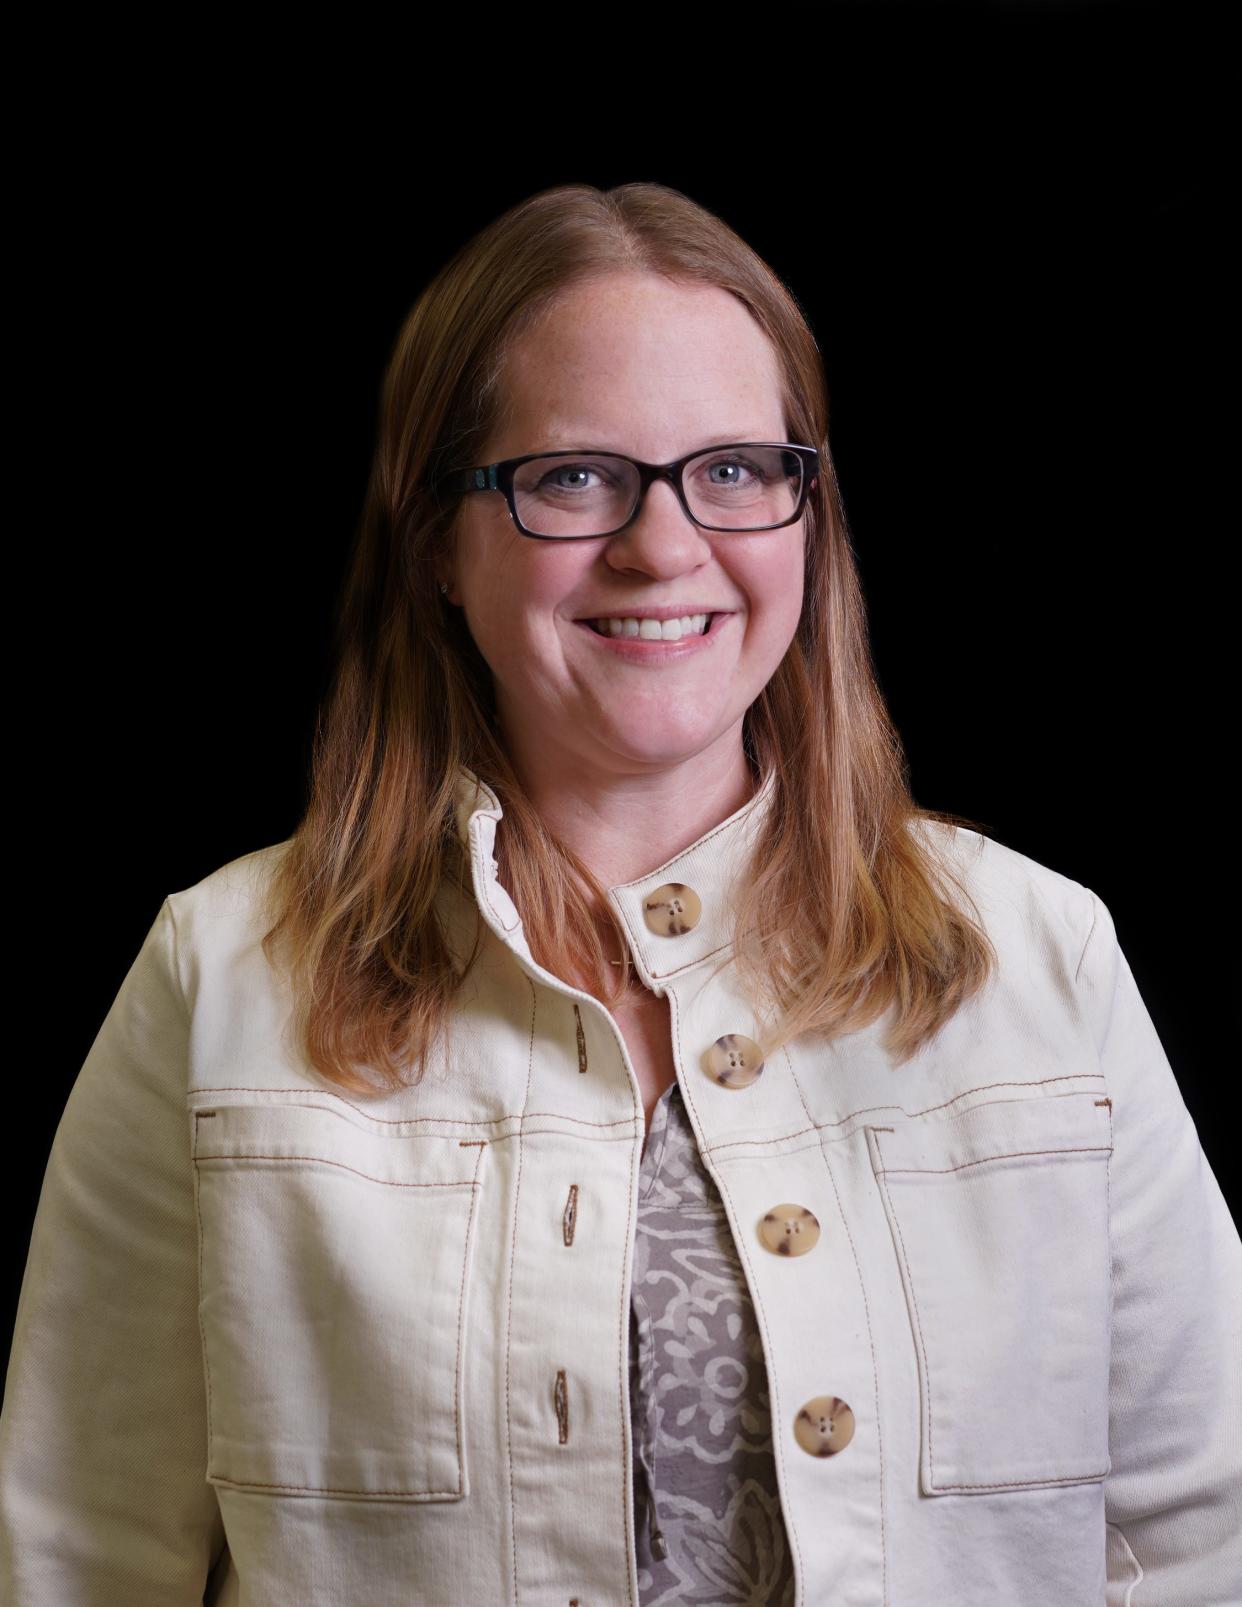 Rebecca Atwood, DVM is the new Director of Veterinary Operations for Petland, Inc. She will be responsible for maintaining professional standards for pet health.